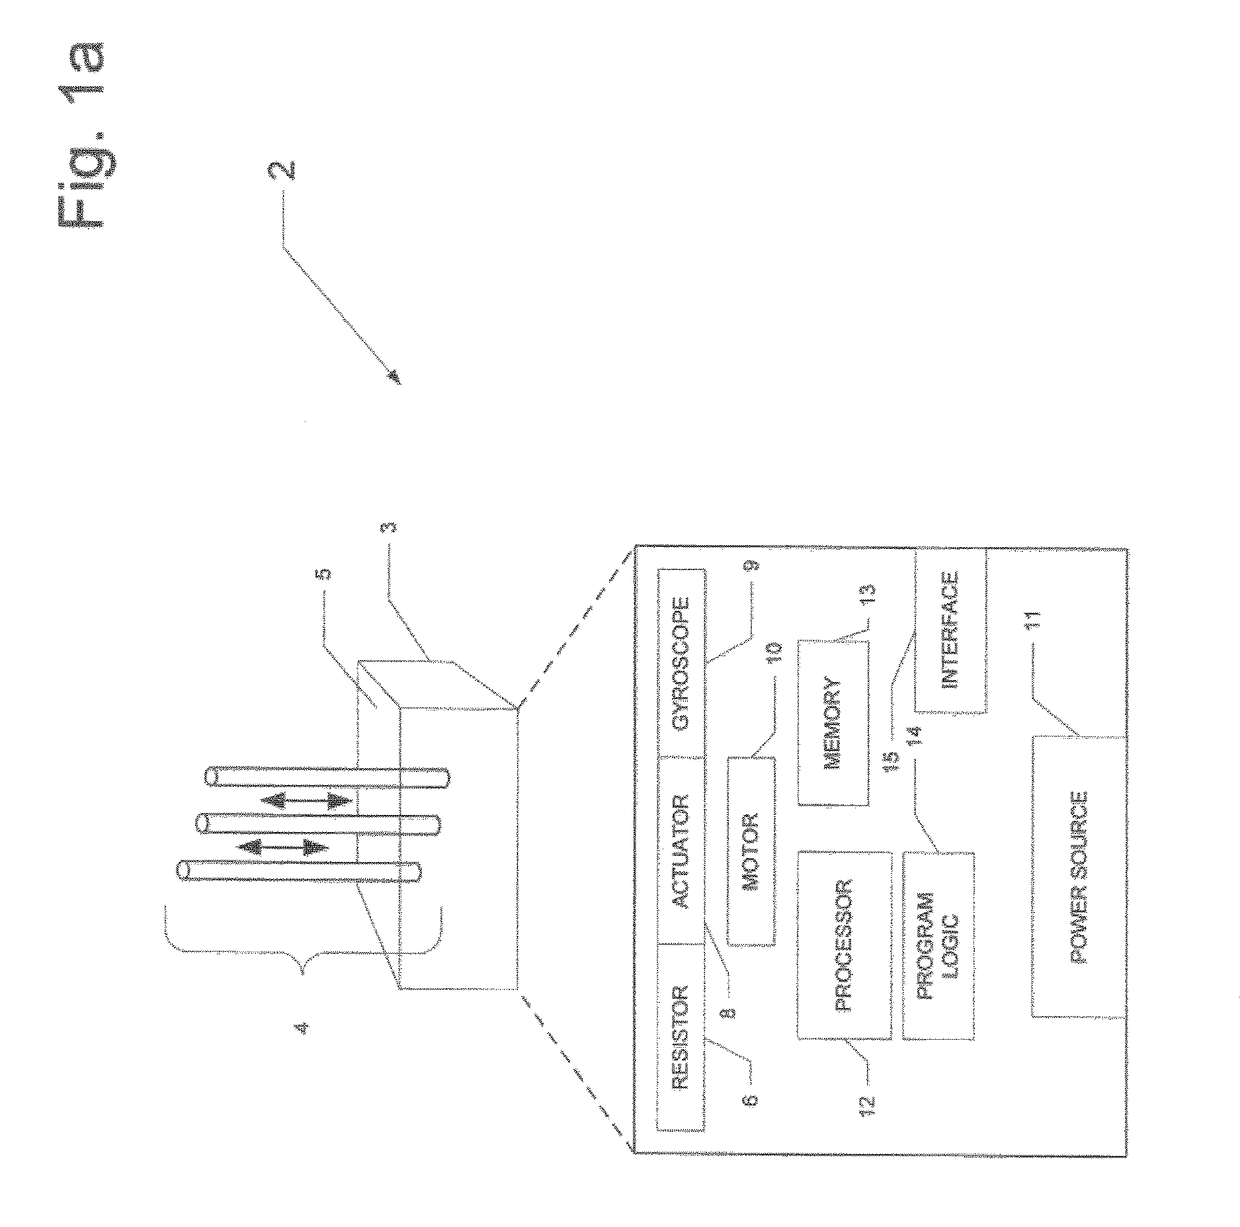 Haptic device capable of managing distributed force